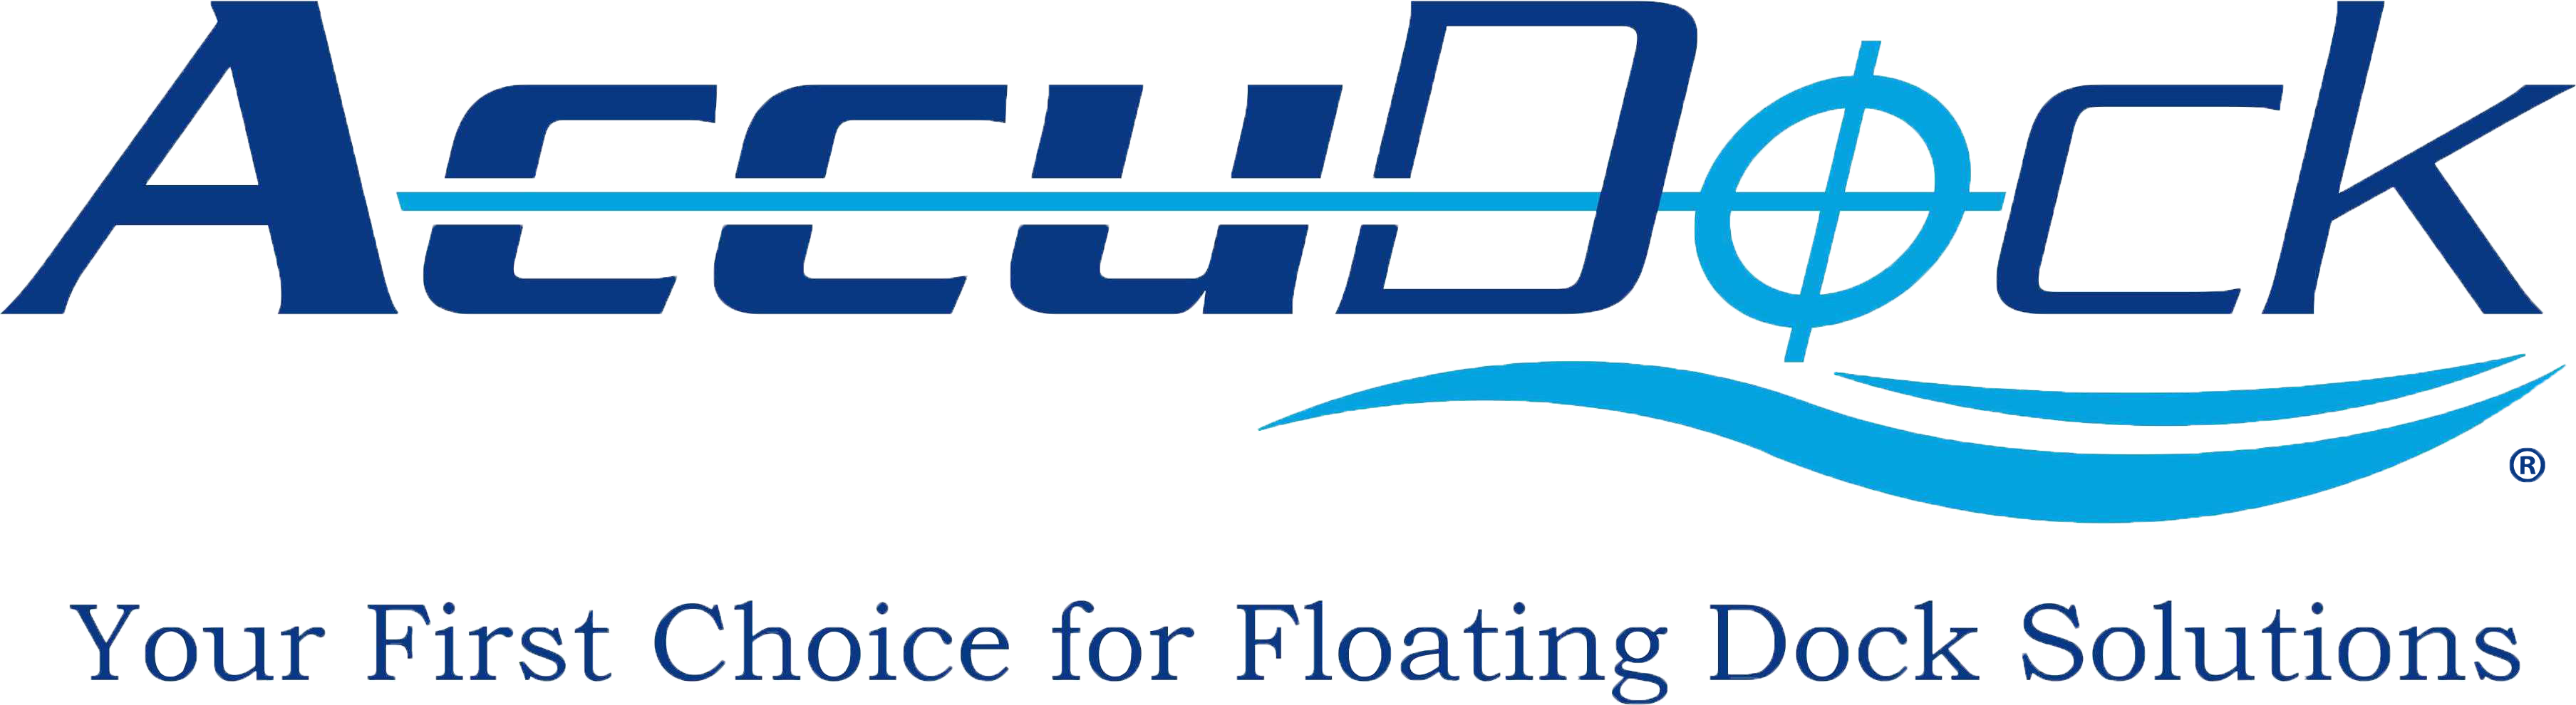 AccuDock Floating Dock Solutions